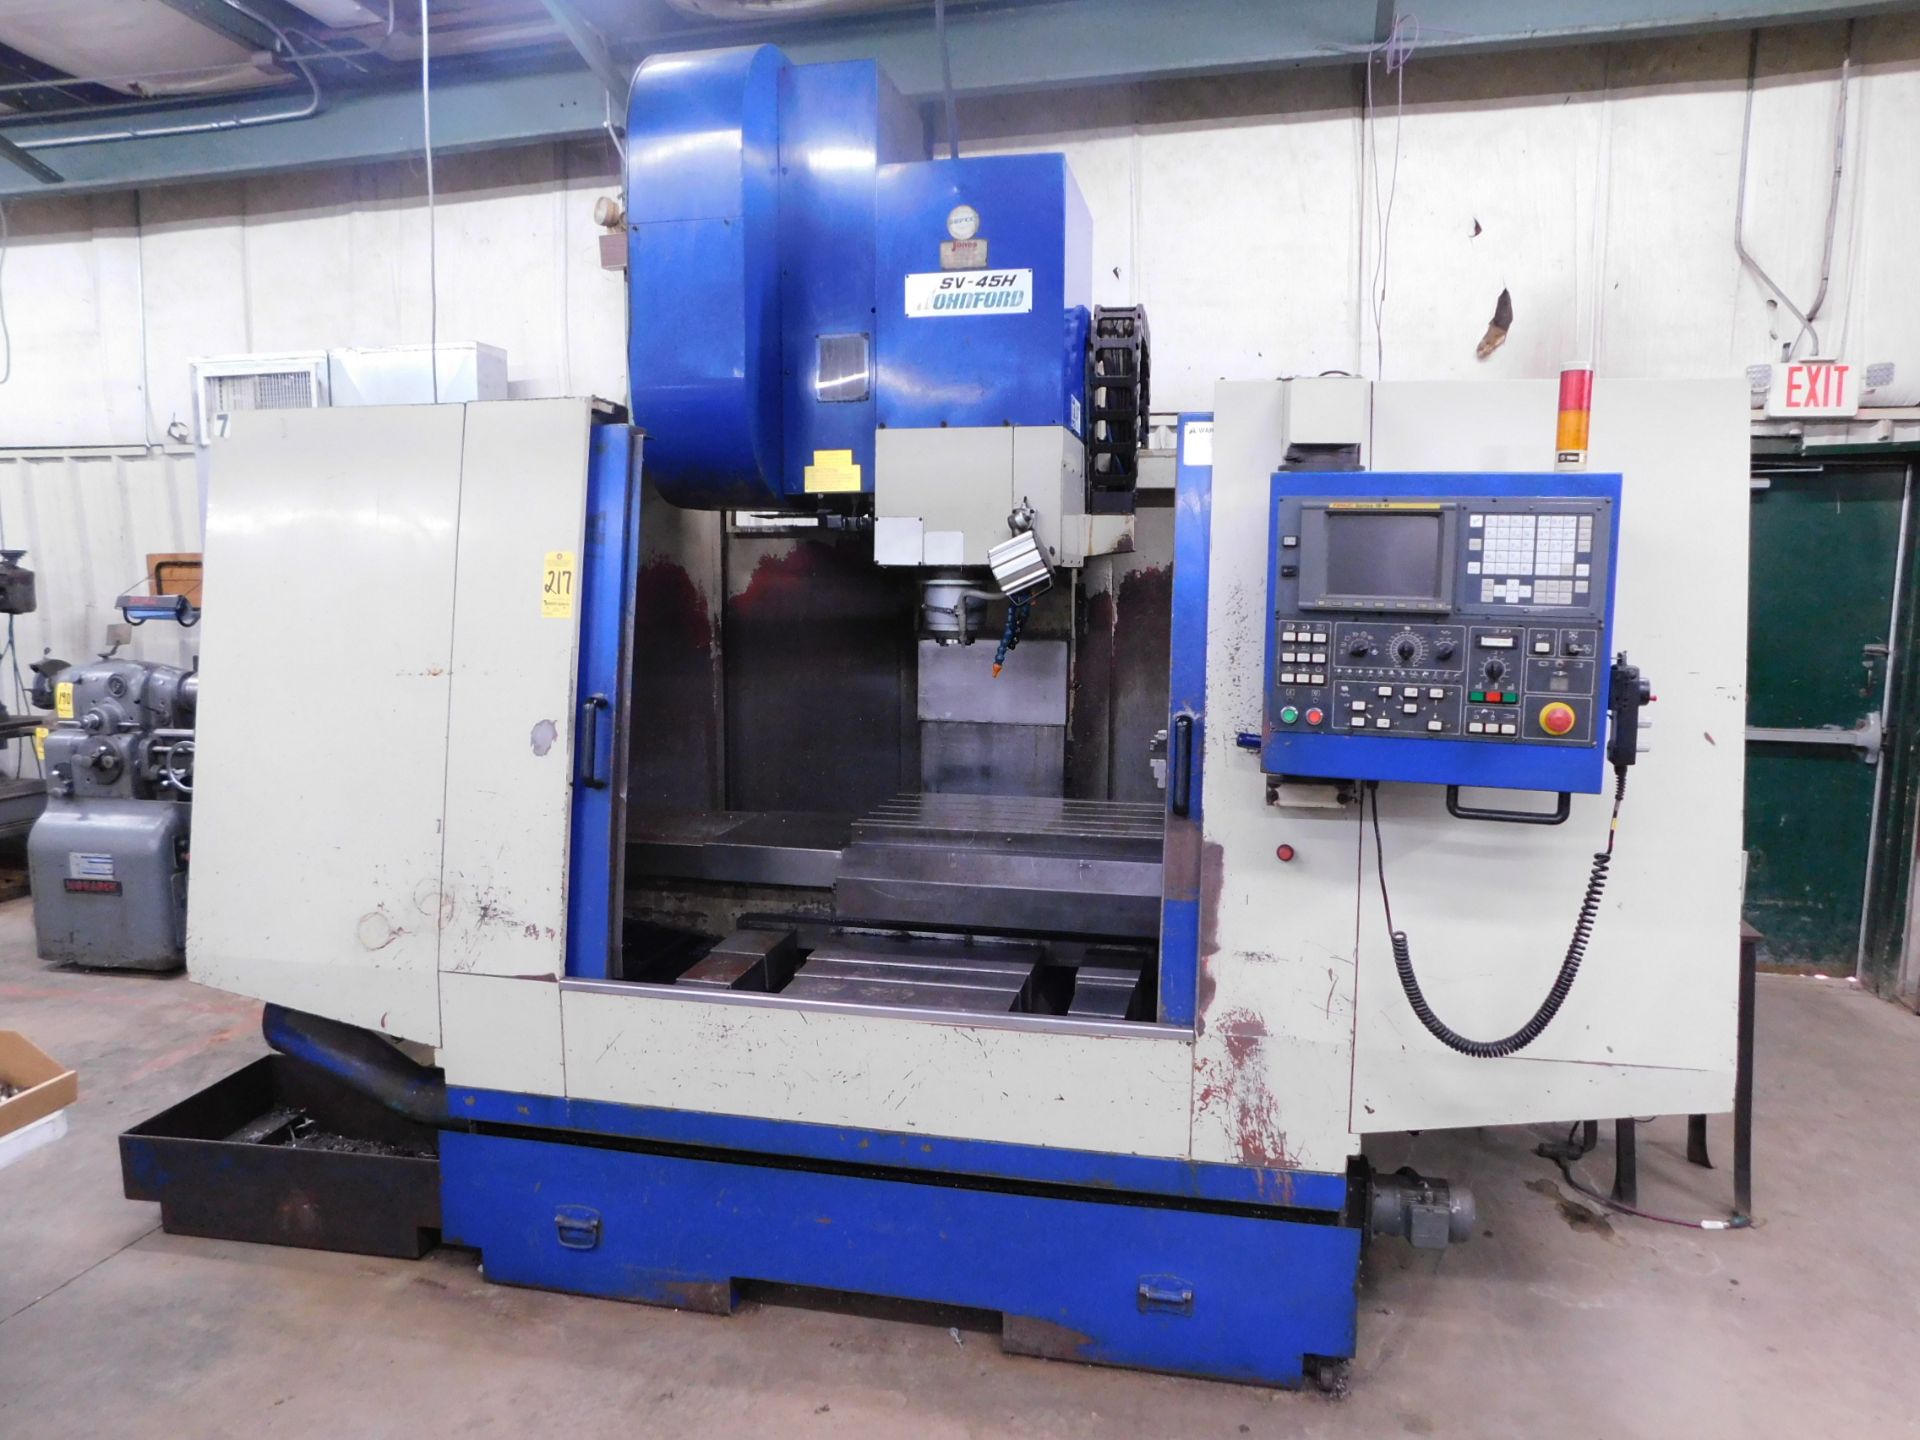 Johnford SV-45H CNC Vertical Machining Center, SN VU8123, New in 1998, 19.7" x 48" Table, Fanuc 18M - Image 2 of 16